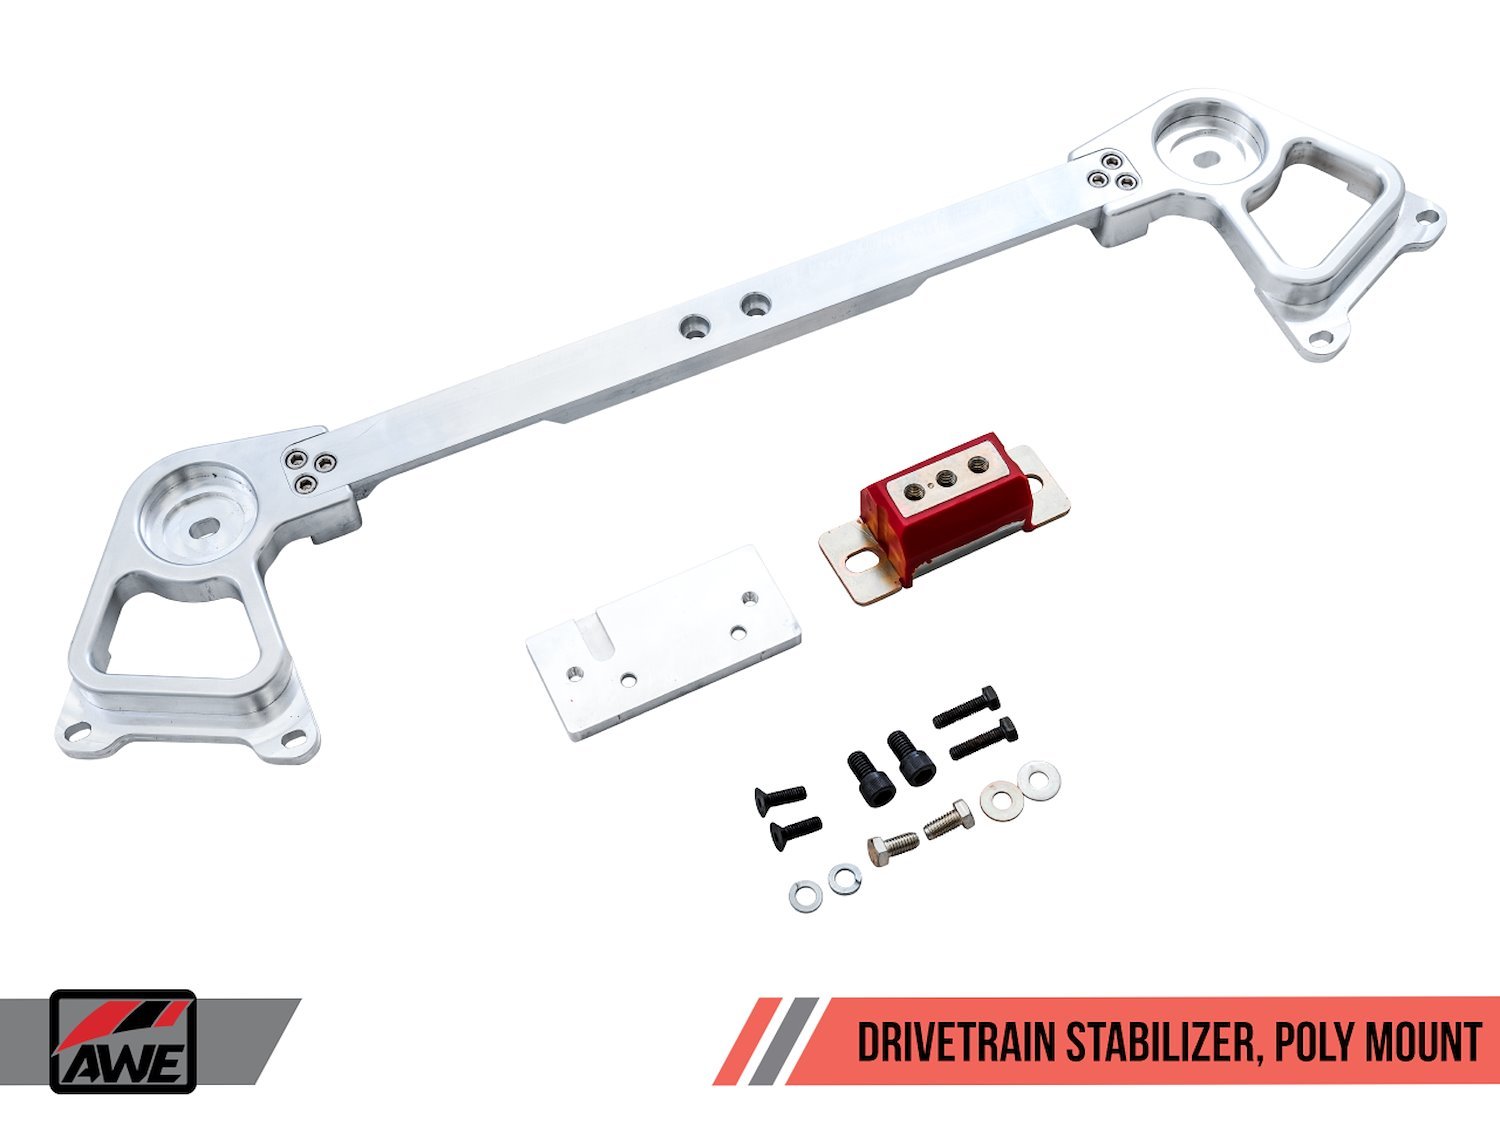 urethane Mount Package for AWE Drivetrain Stabilizer (DTS)